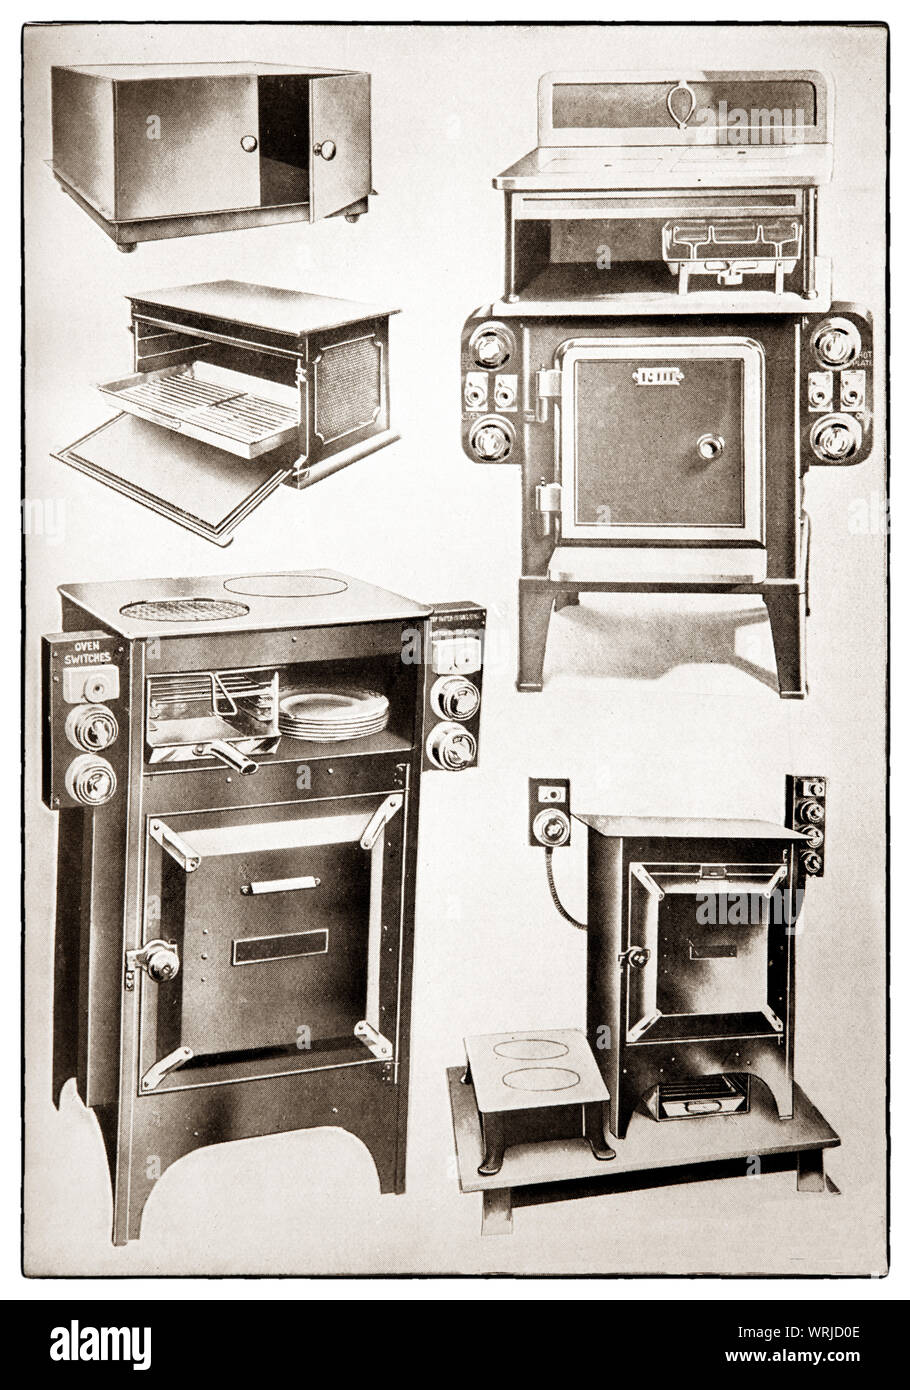 The latest kichenware displayed at the beginning of the 1930s in Mrs Beeton's 'All About Cookery' 1930 Edition. The featured electrically operated items include a hot cupboard; electric griller; electric cooker; small oven; hot plates. Stock Photo